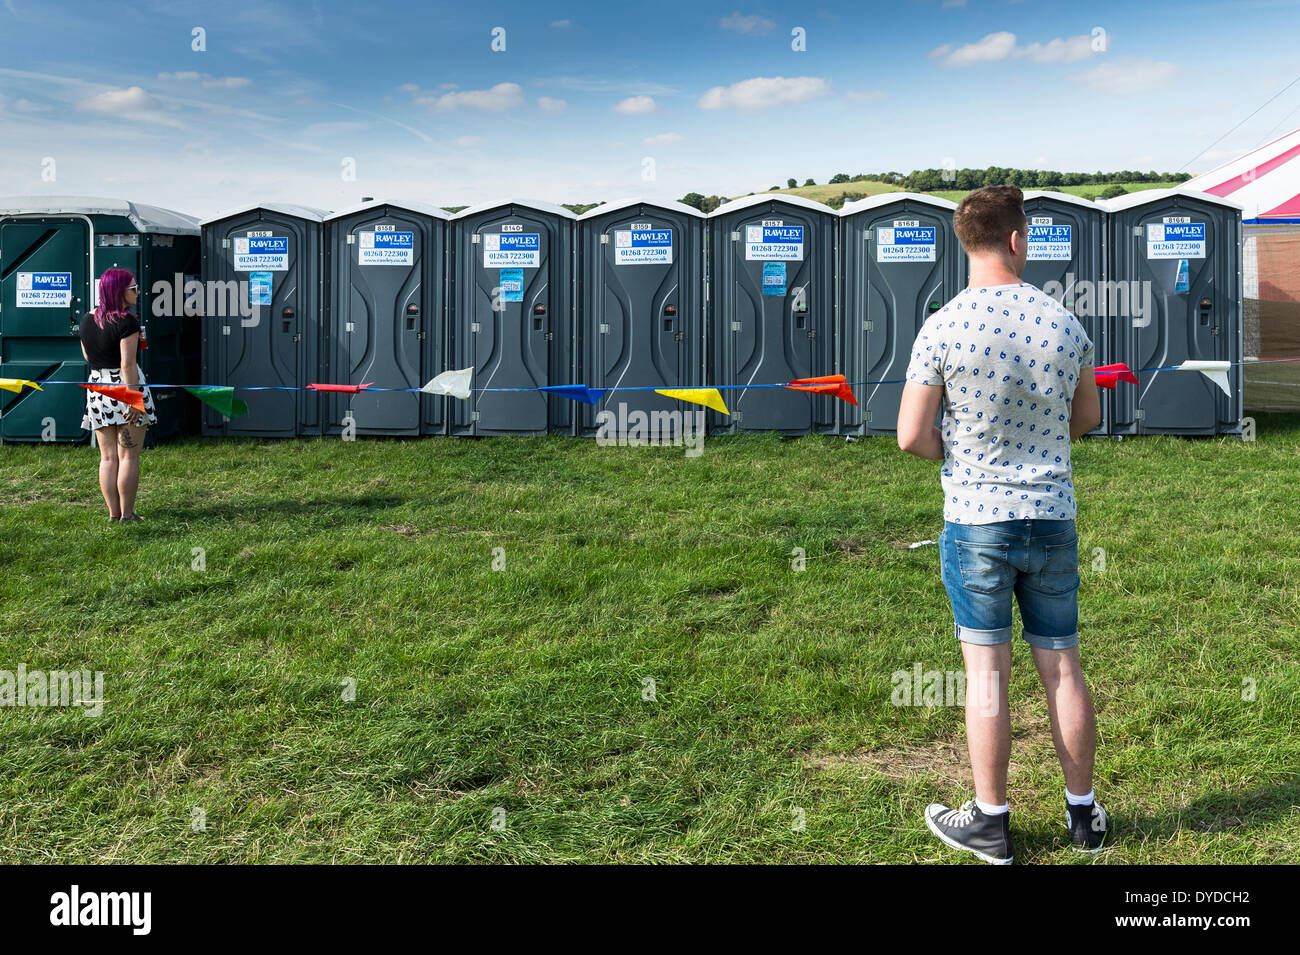 toilets at the Brownstock Festival in Essex. Stock Photo